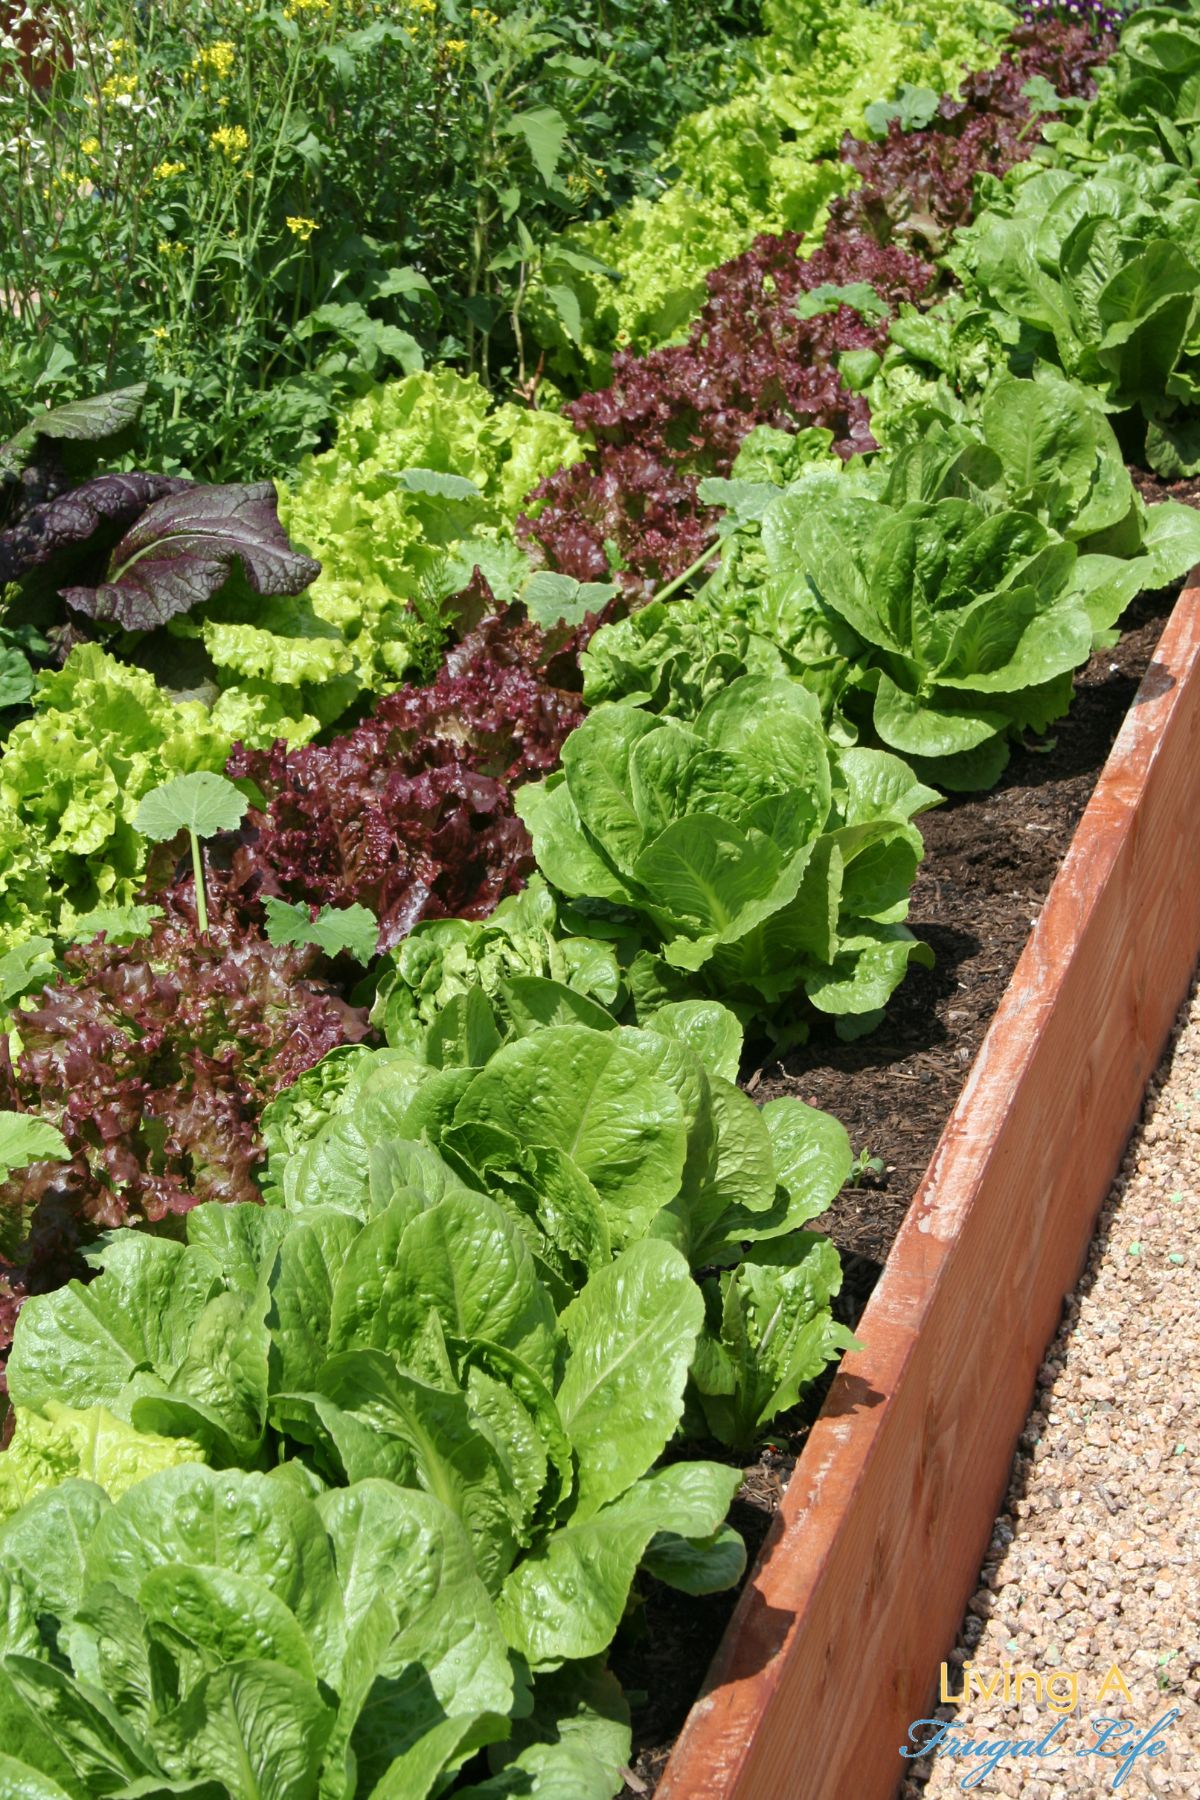 Rows of different kinds of lettuce in q raised bed garden.